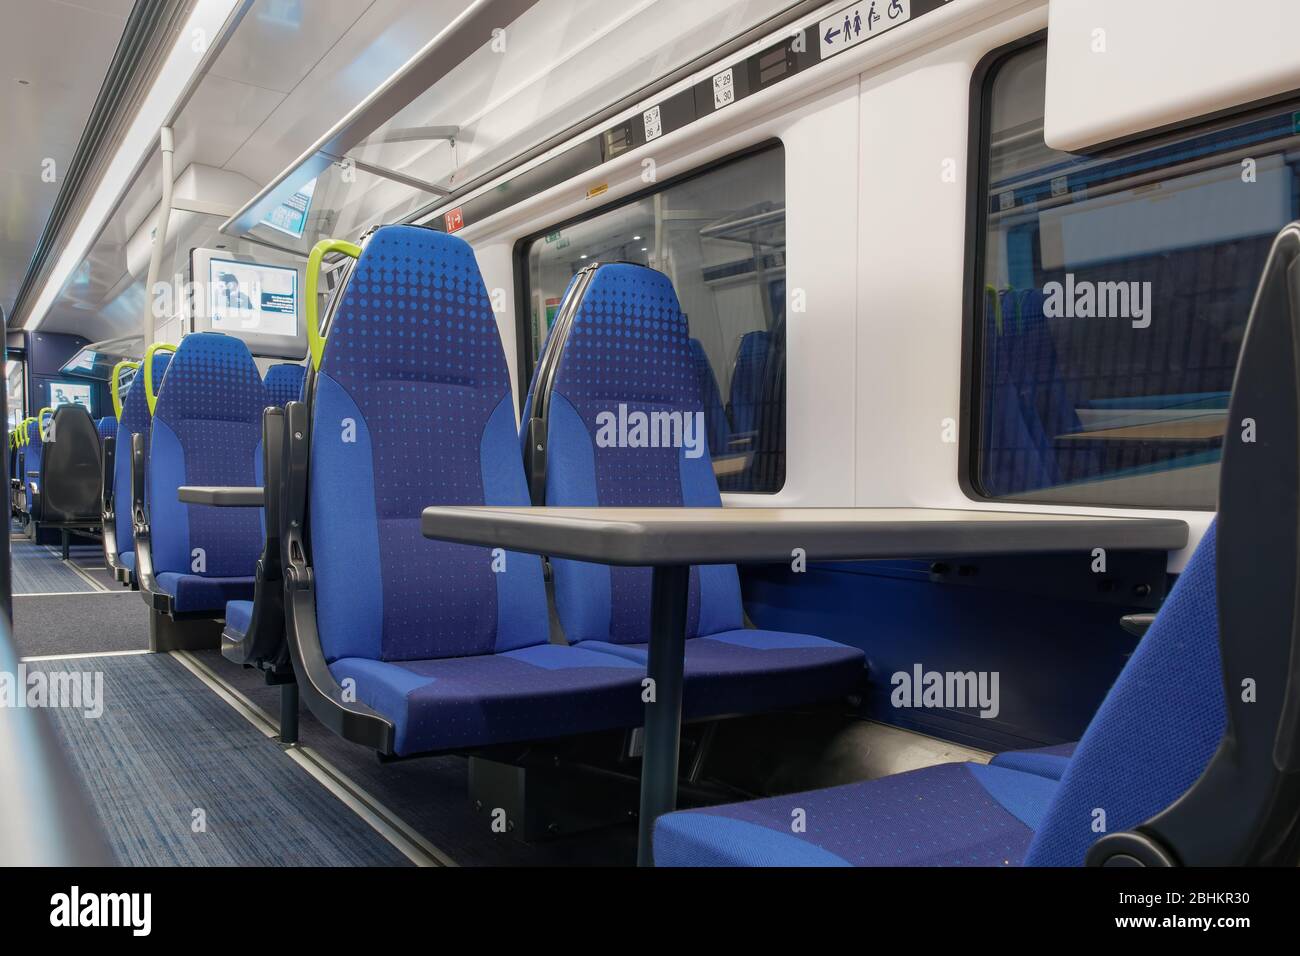 Interior of UK empty train stopped at station. Seat layout with tables and passenger lane inside Transpennine Express British train company coach. Stock Photo